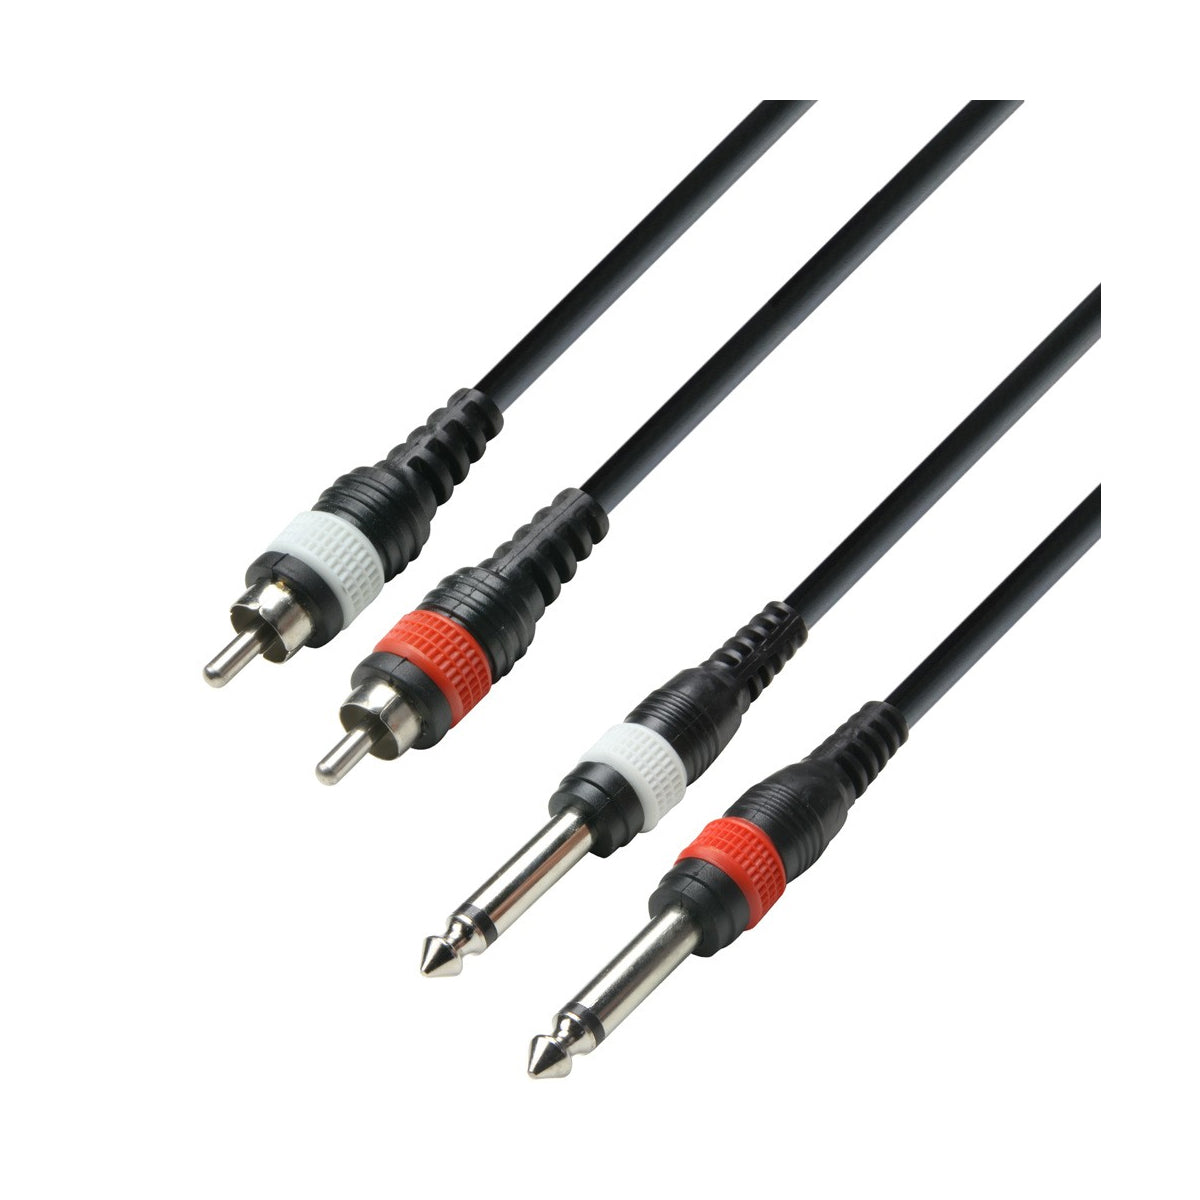 Adam Hall Cables K3 TPC 0600 - Audio Cable 2 x RCA male to 2 x 6.3mm Jack mono 6m